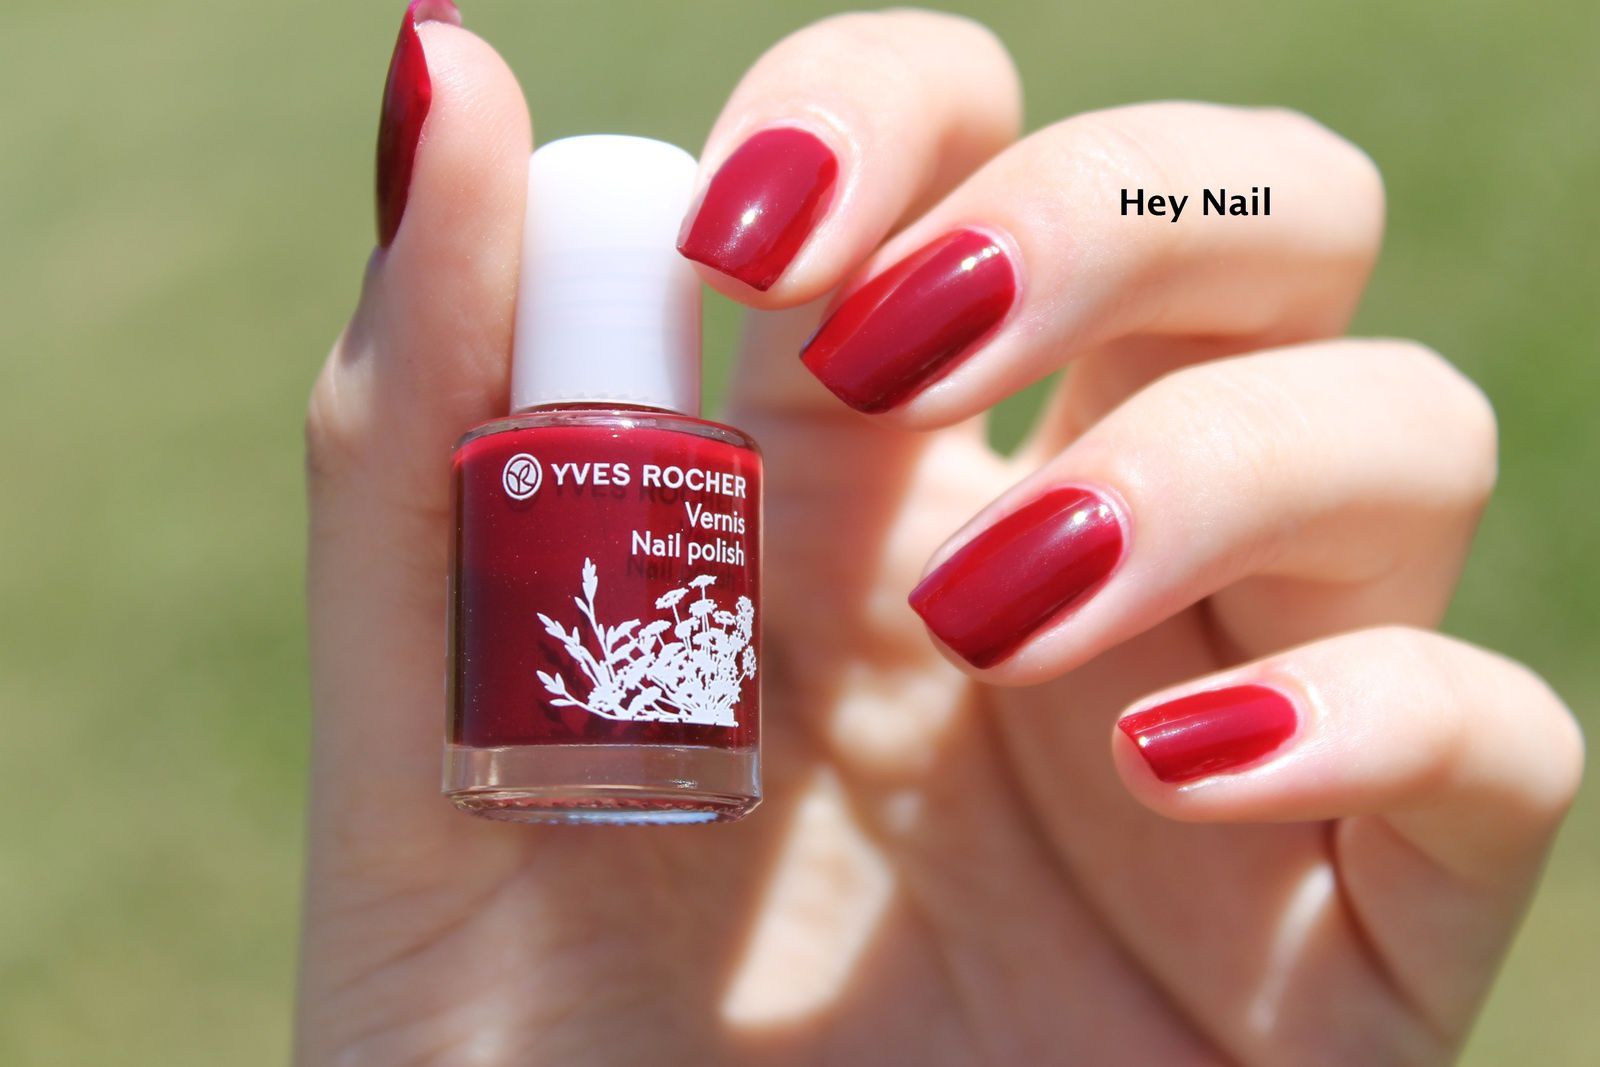 Yves Rocher n°32 - Cerise Noire - Hey Nail - Ongles & Maquillages